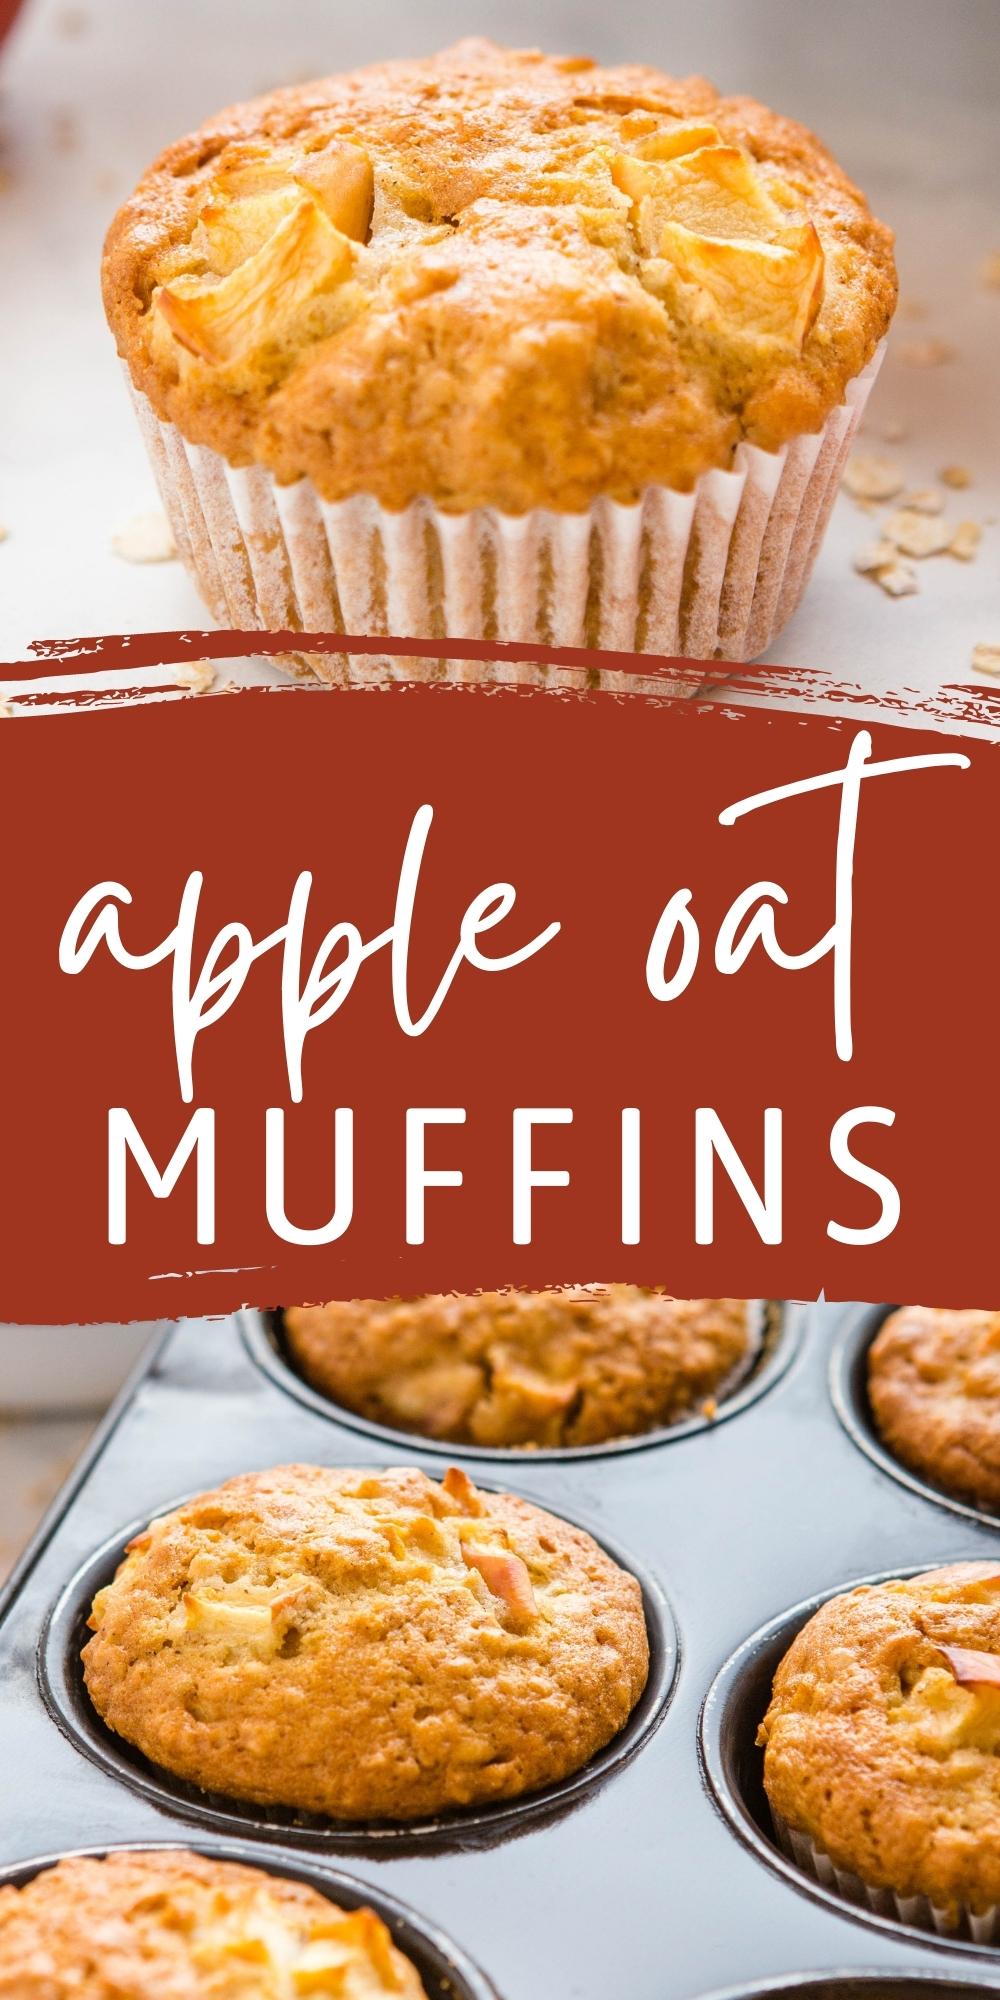 These Apple Oat Muffins are the perfect sweet snack or breakfast made with whole grain oats, sweet apples, and fragrant cinnamon and nutmeg! Recipe from thebusybaker.ca! #appleoatmuffins #applemuffins #apple #muffins #baking #cinnamon #fallbaking #baking #fall #apples via @busybakerblog